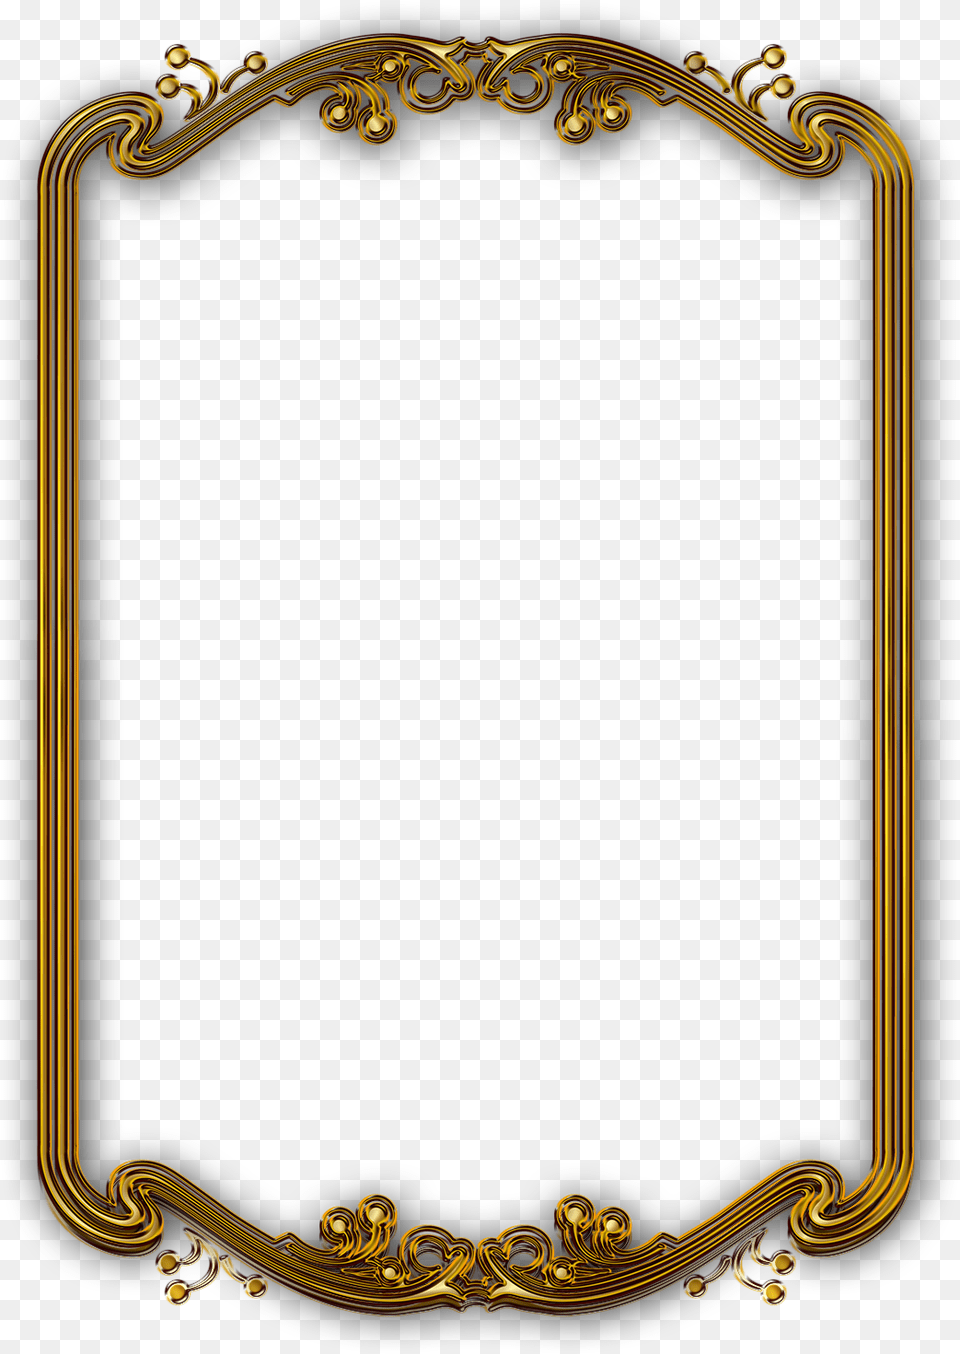 Gold Picture Frames Hd Frame Download, White Board, Mirror, Oval, Photography Free Transparent Png